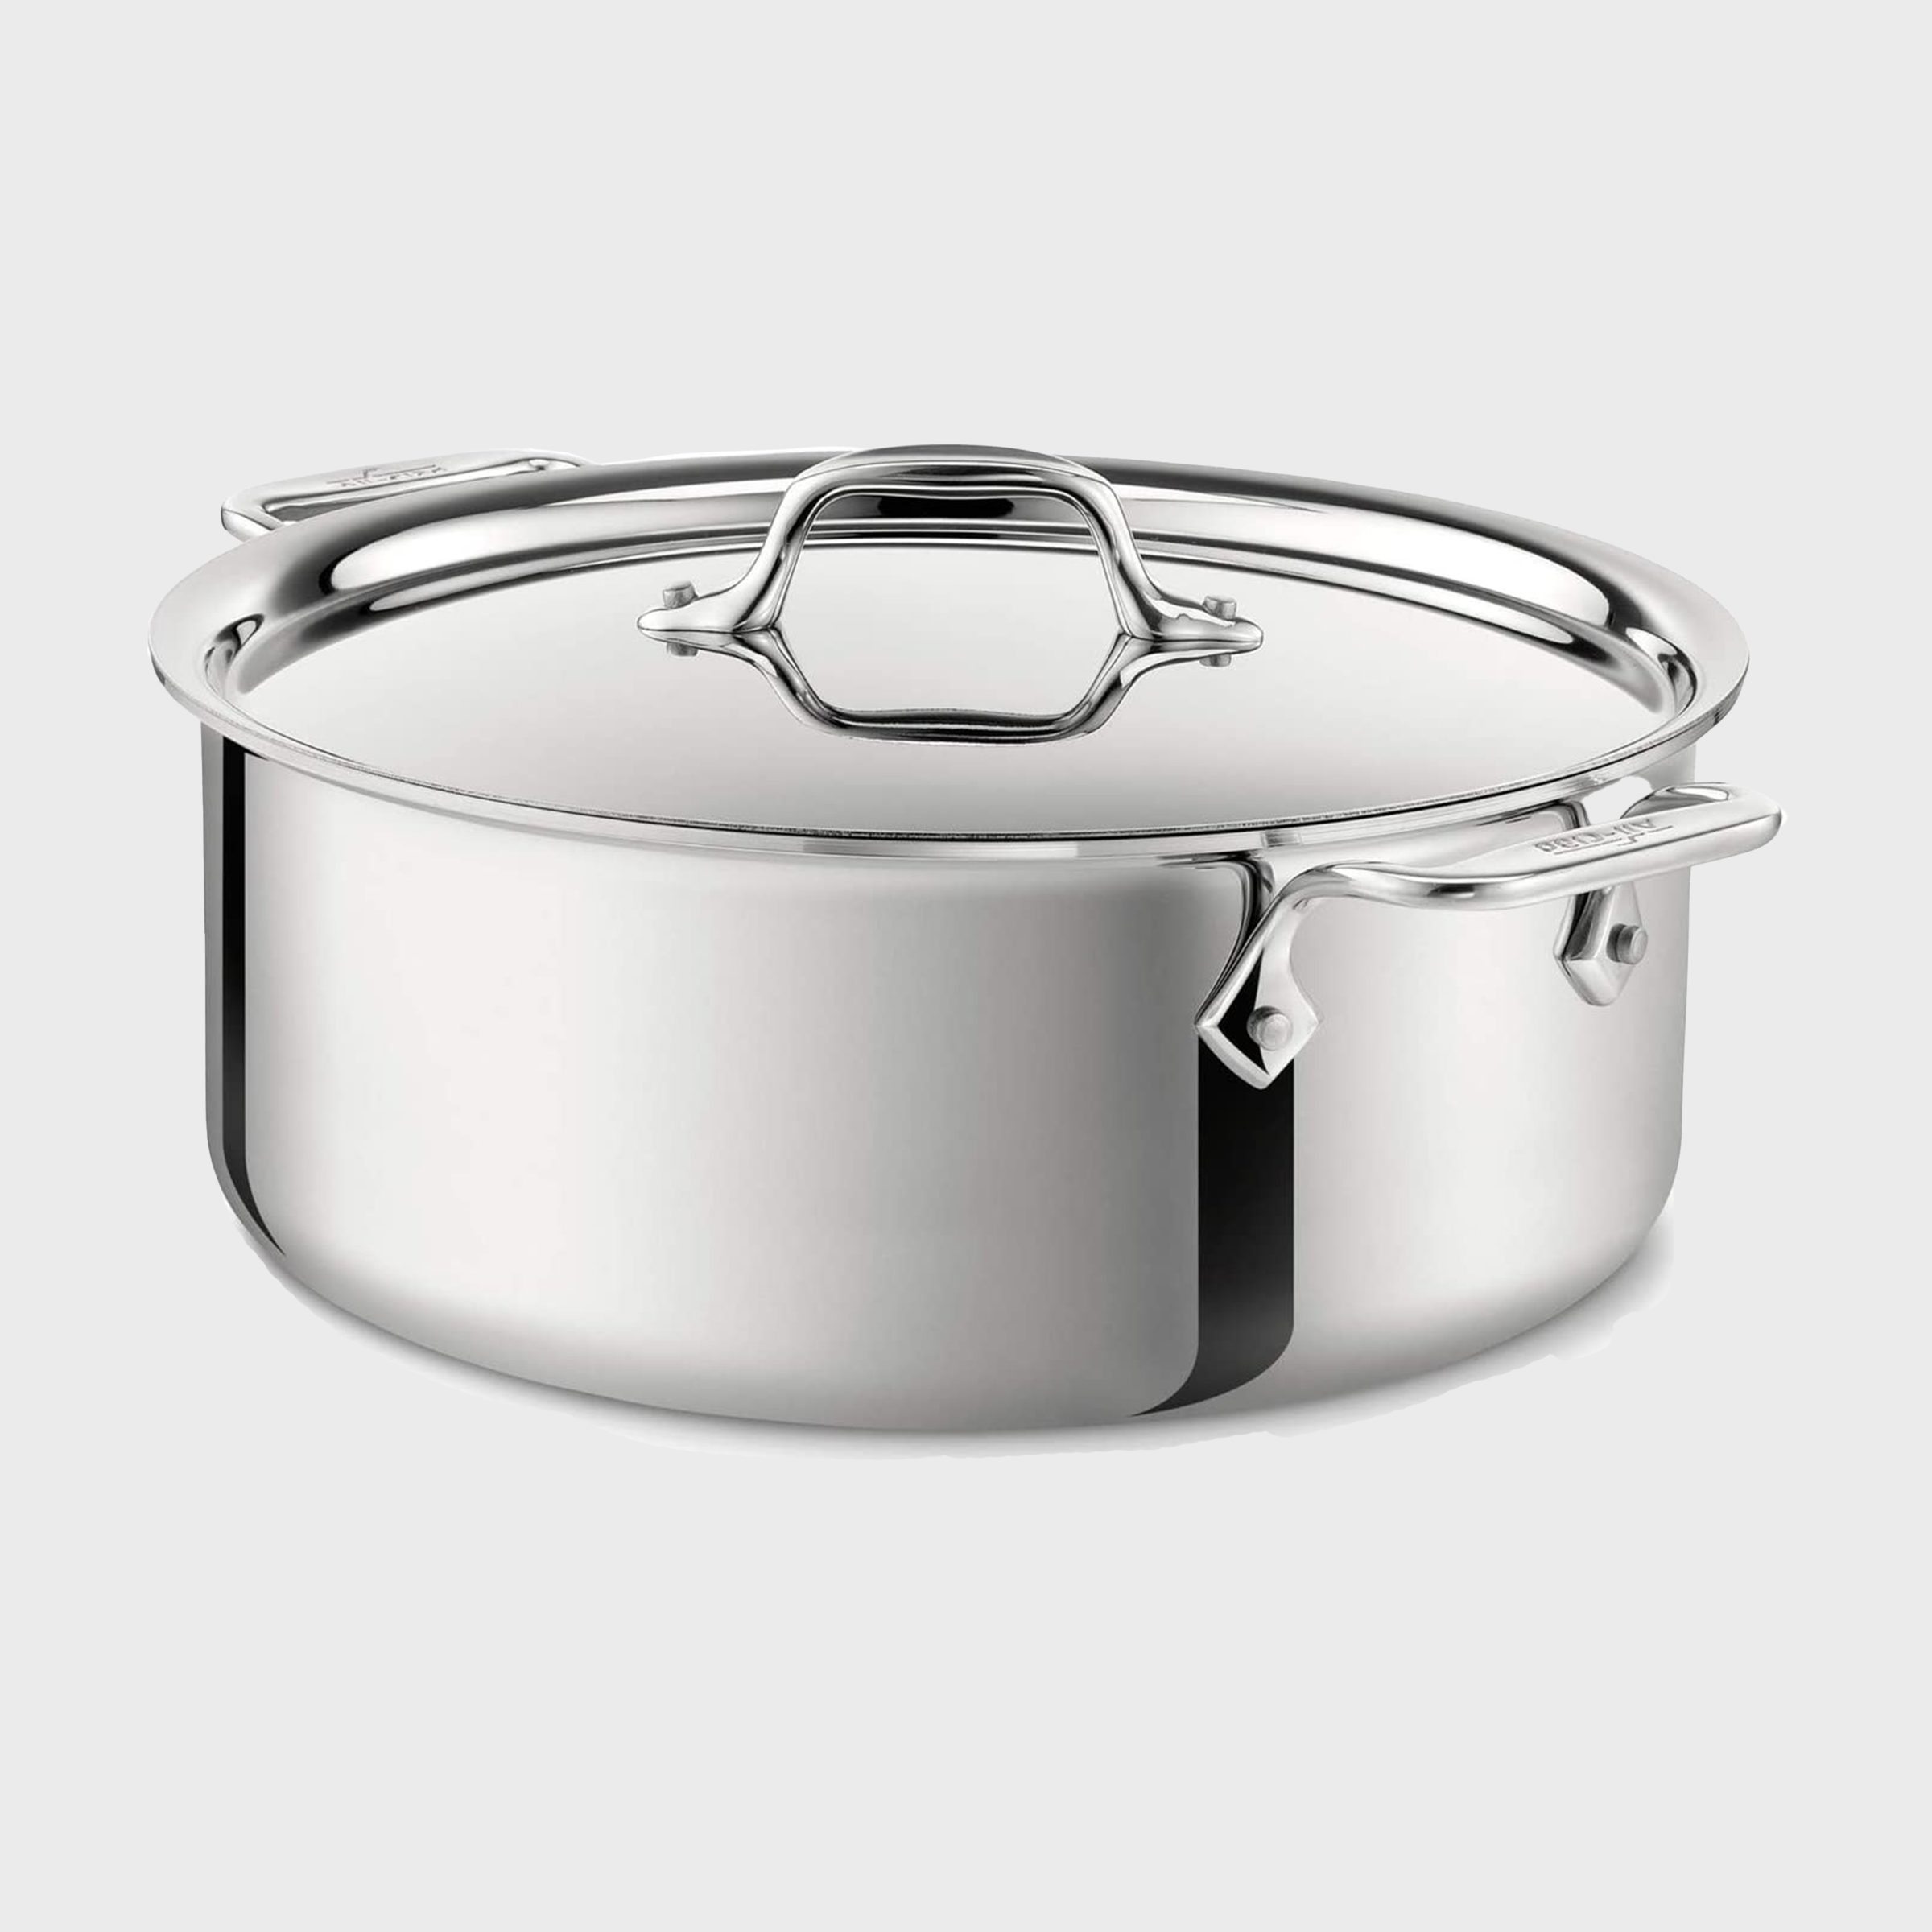 All-Clad D3 Stainless Steel 50th Anniversary Casserole with Lid, 3 qt.